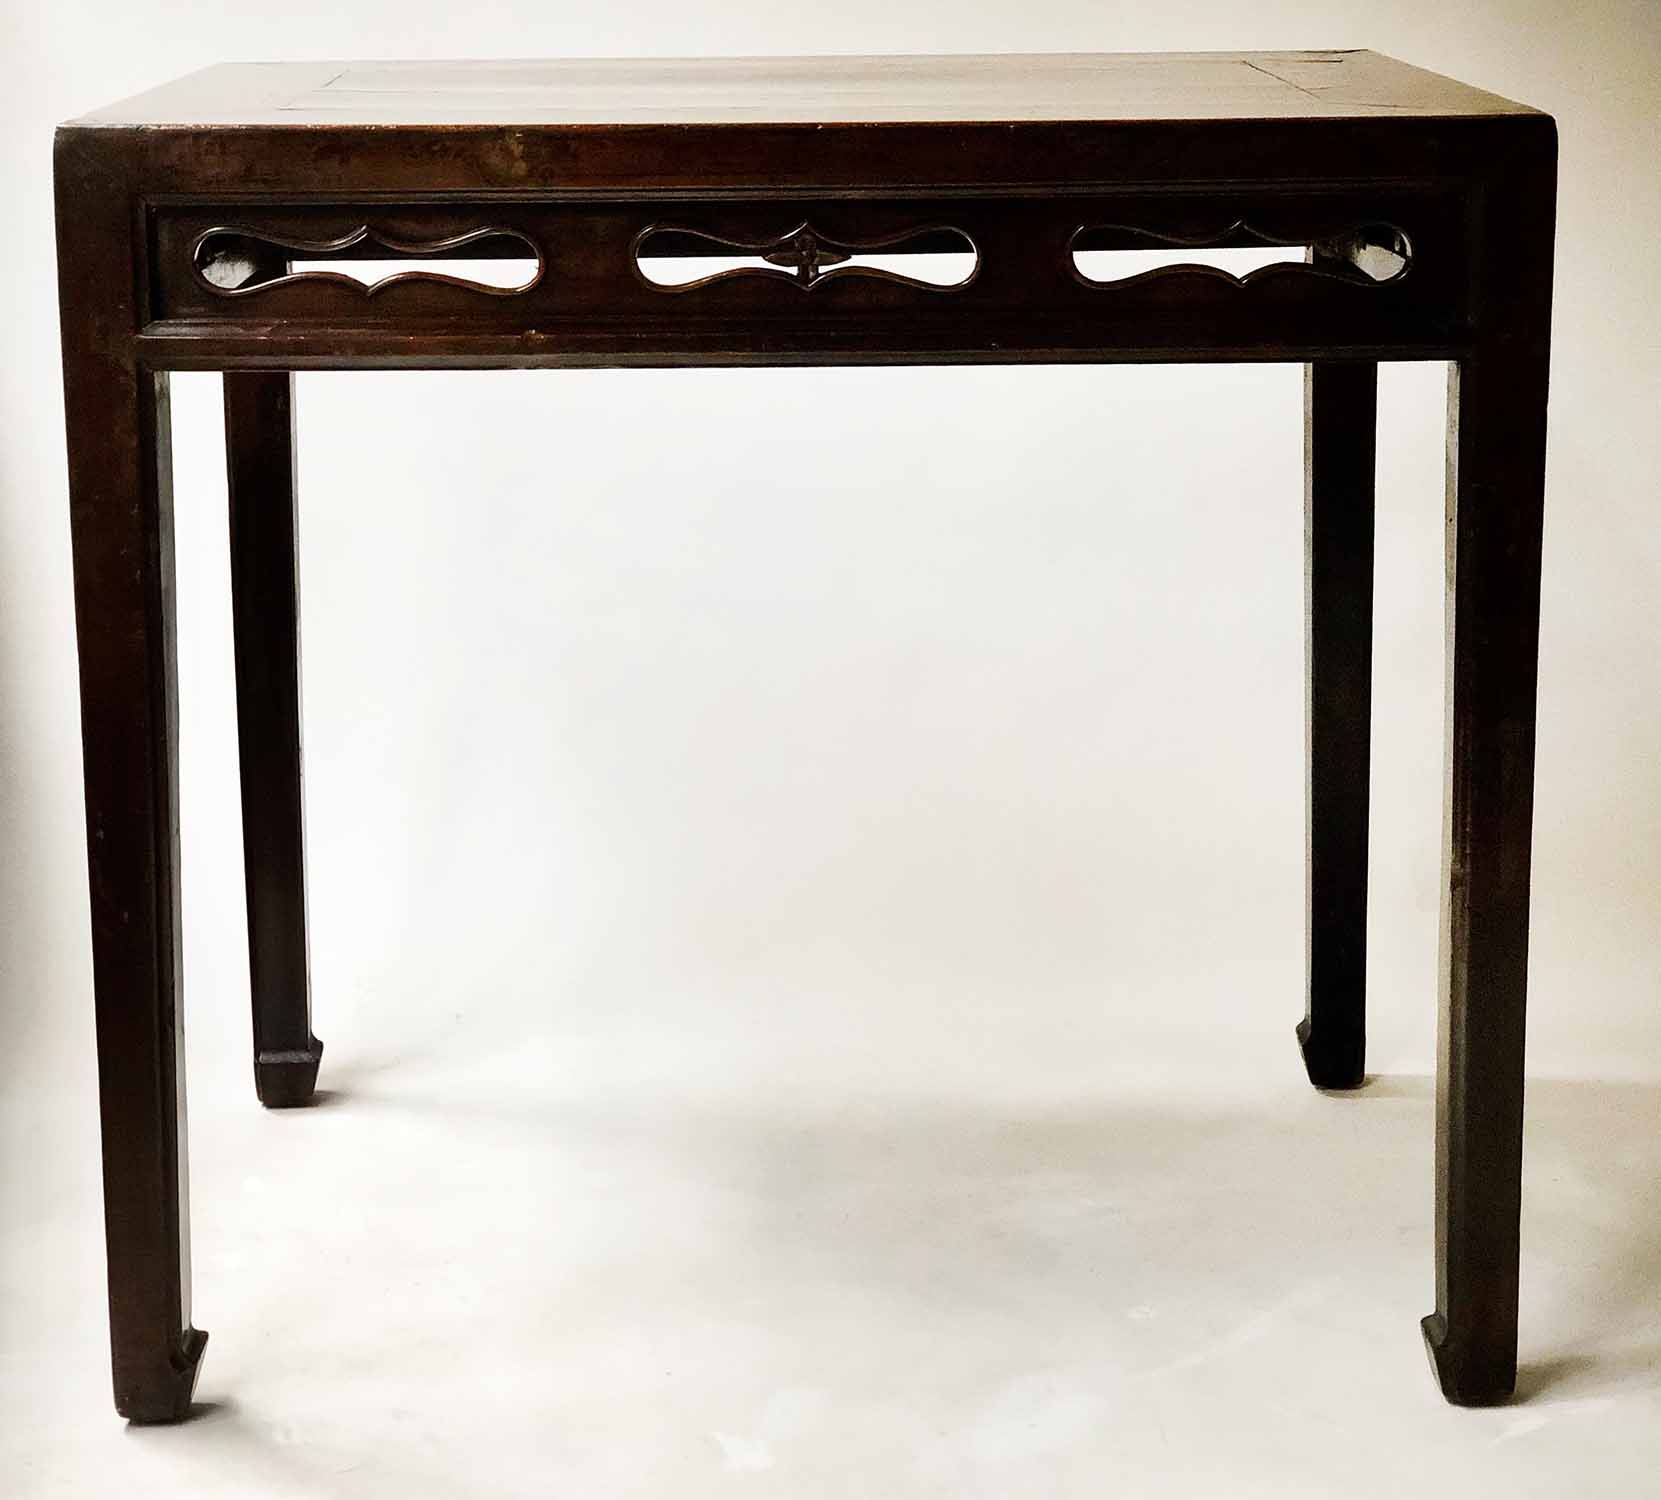 SCRIBES TABLE, 19th century Chinese lacquered hardwood channelled with pierced frieze, - Image 3 of 4